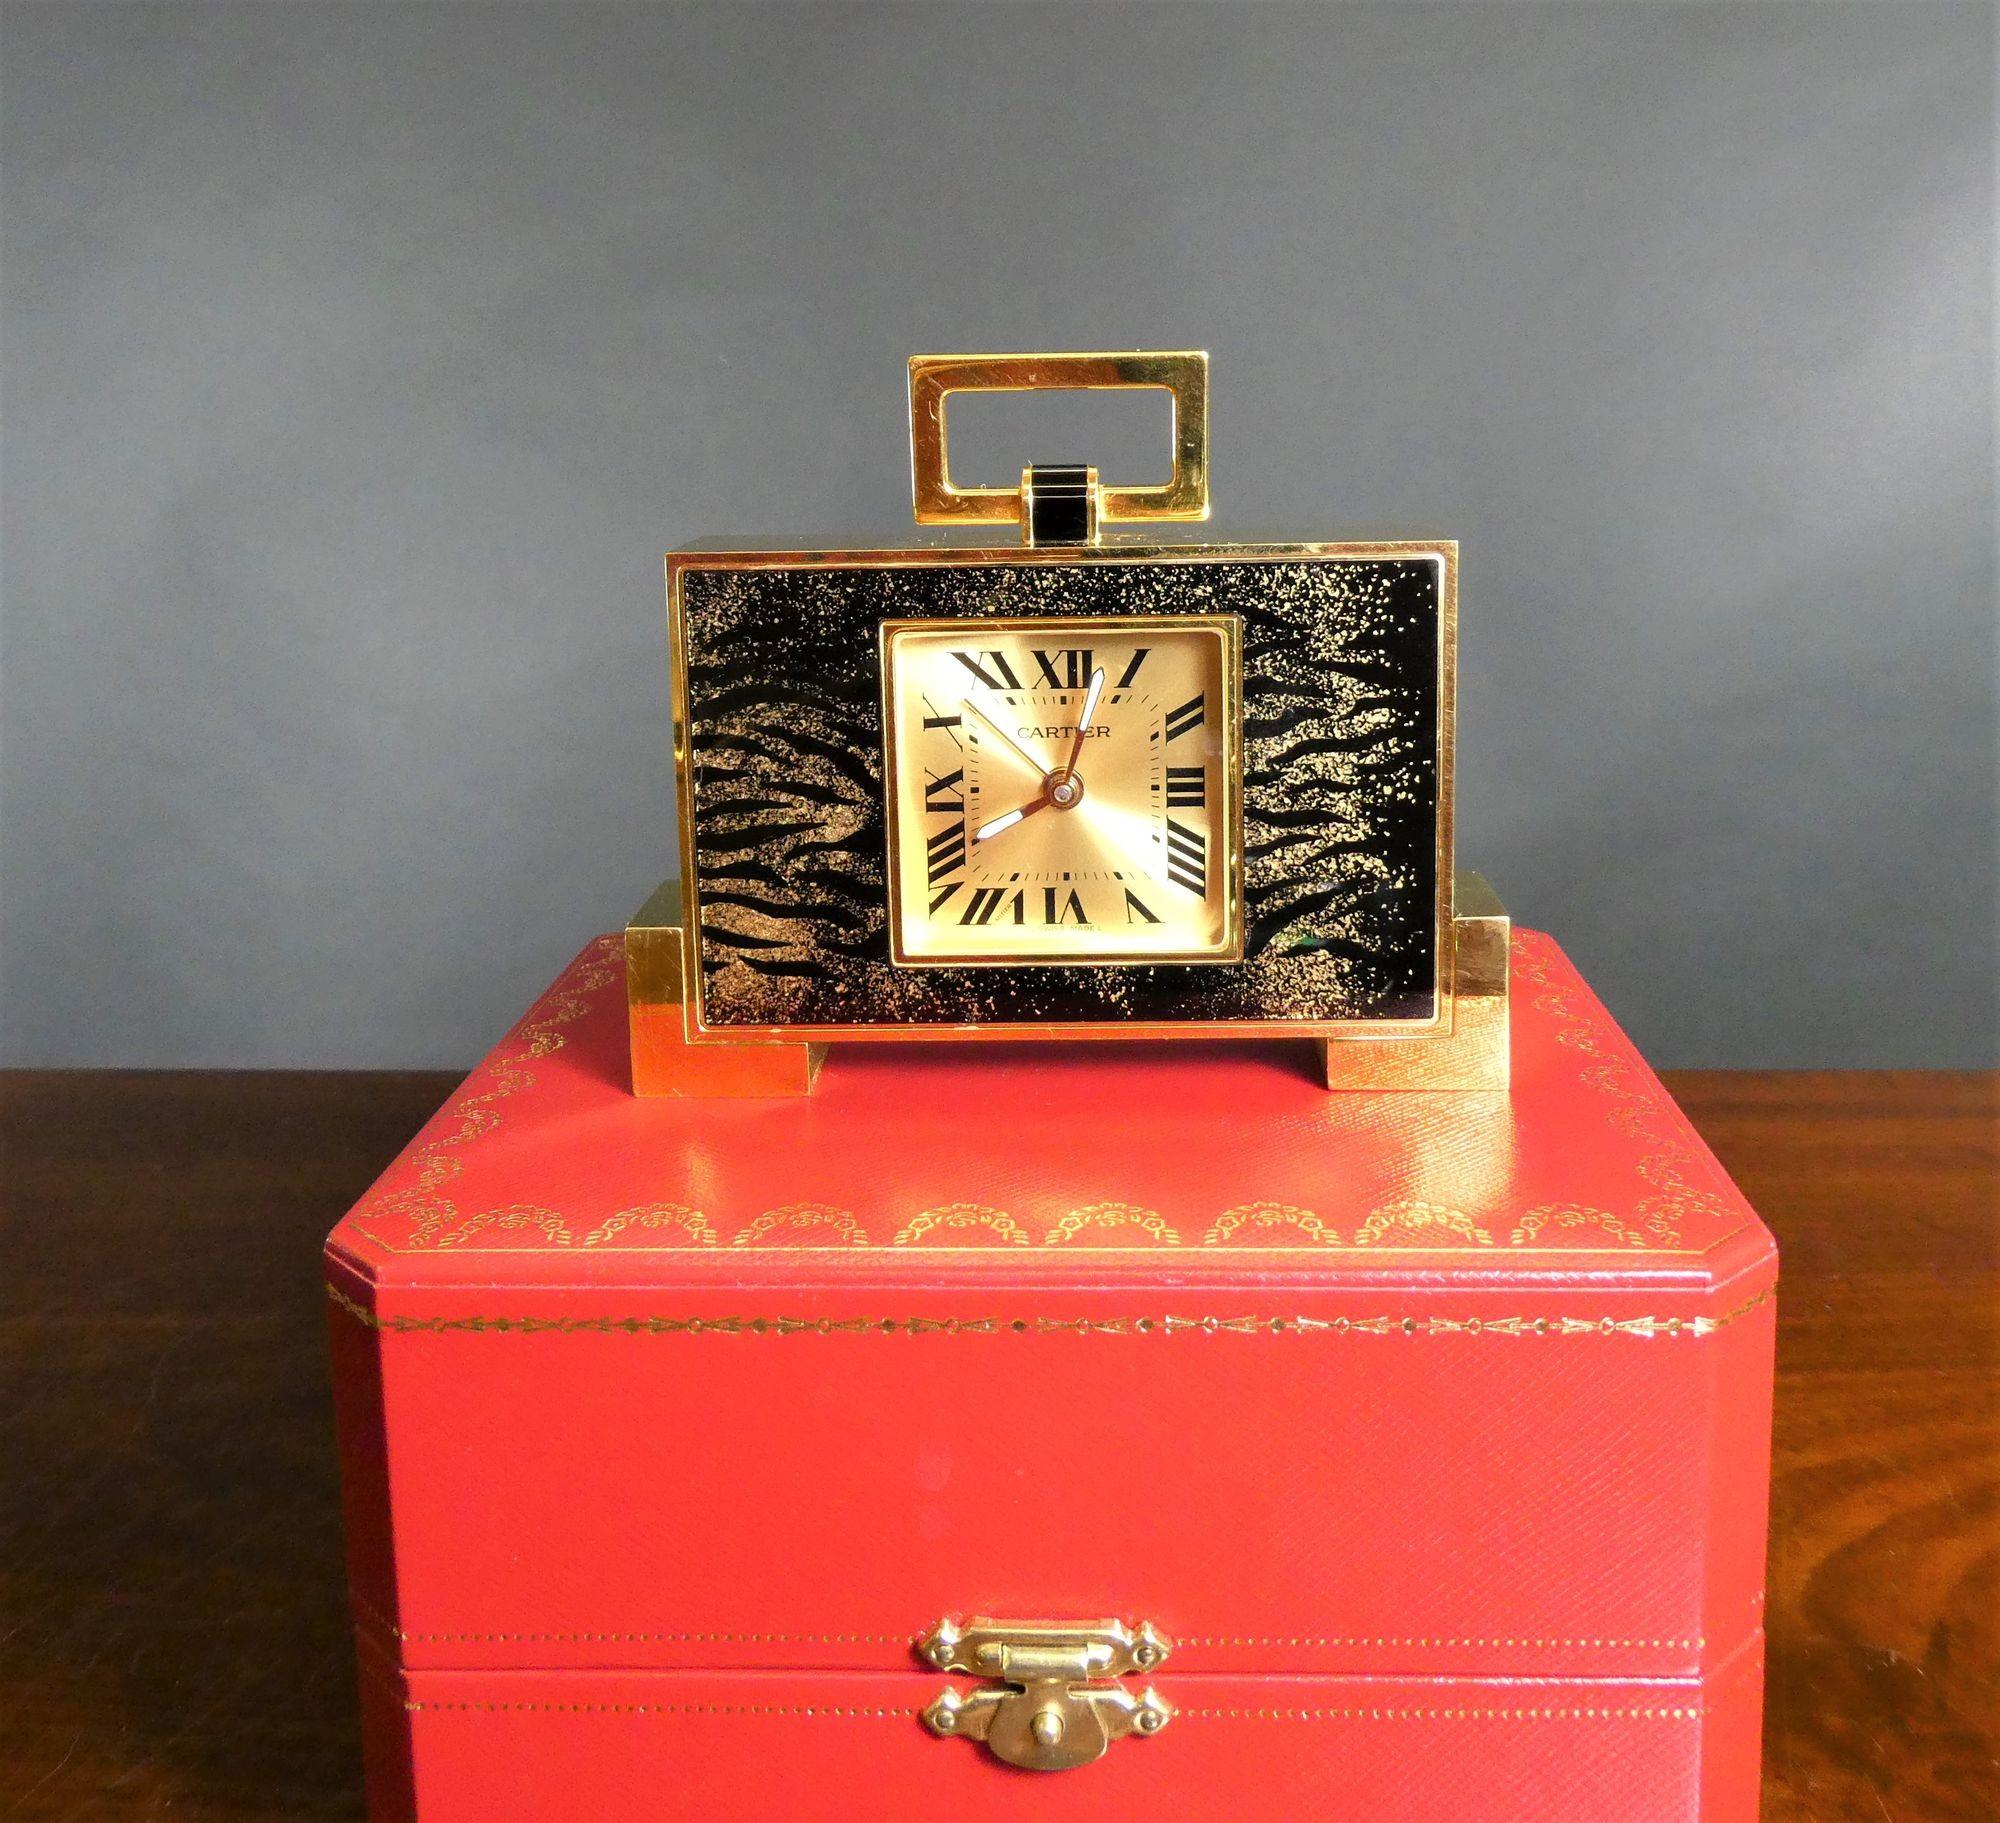 Cartier ‘Leopard Print’ travel alarm clock.
 
 
Cartier ‘Leopard Print’ travel alarm clock housed in a rectangular case with hinged carrying handle.
Square dial with Roman numerals, original hands and signed ‘Cartier’.
Quartz movement with